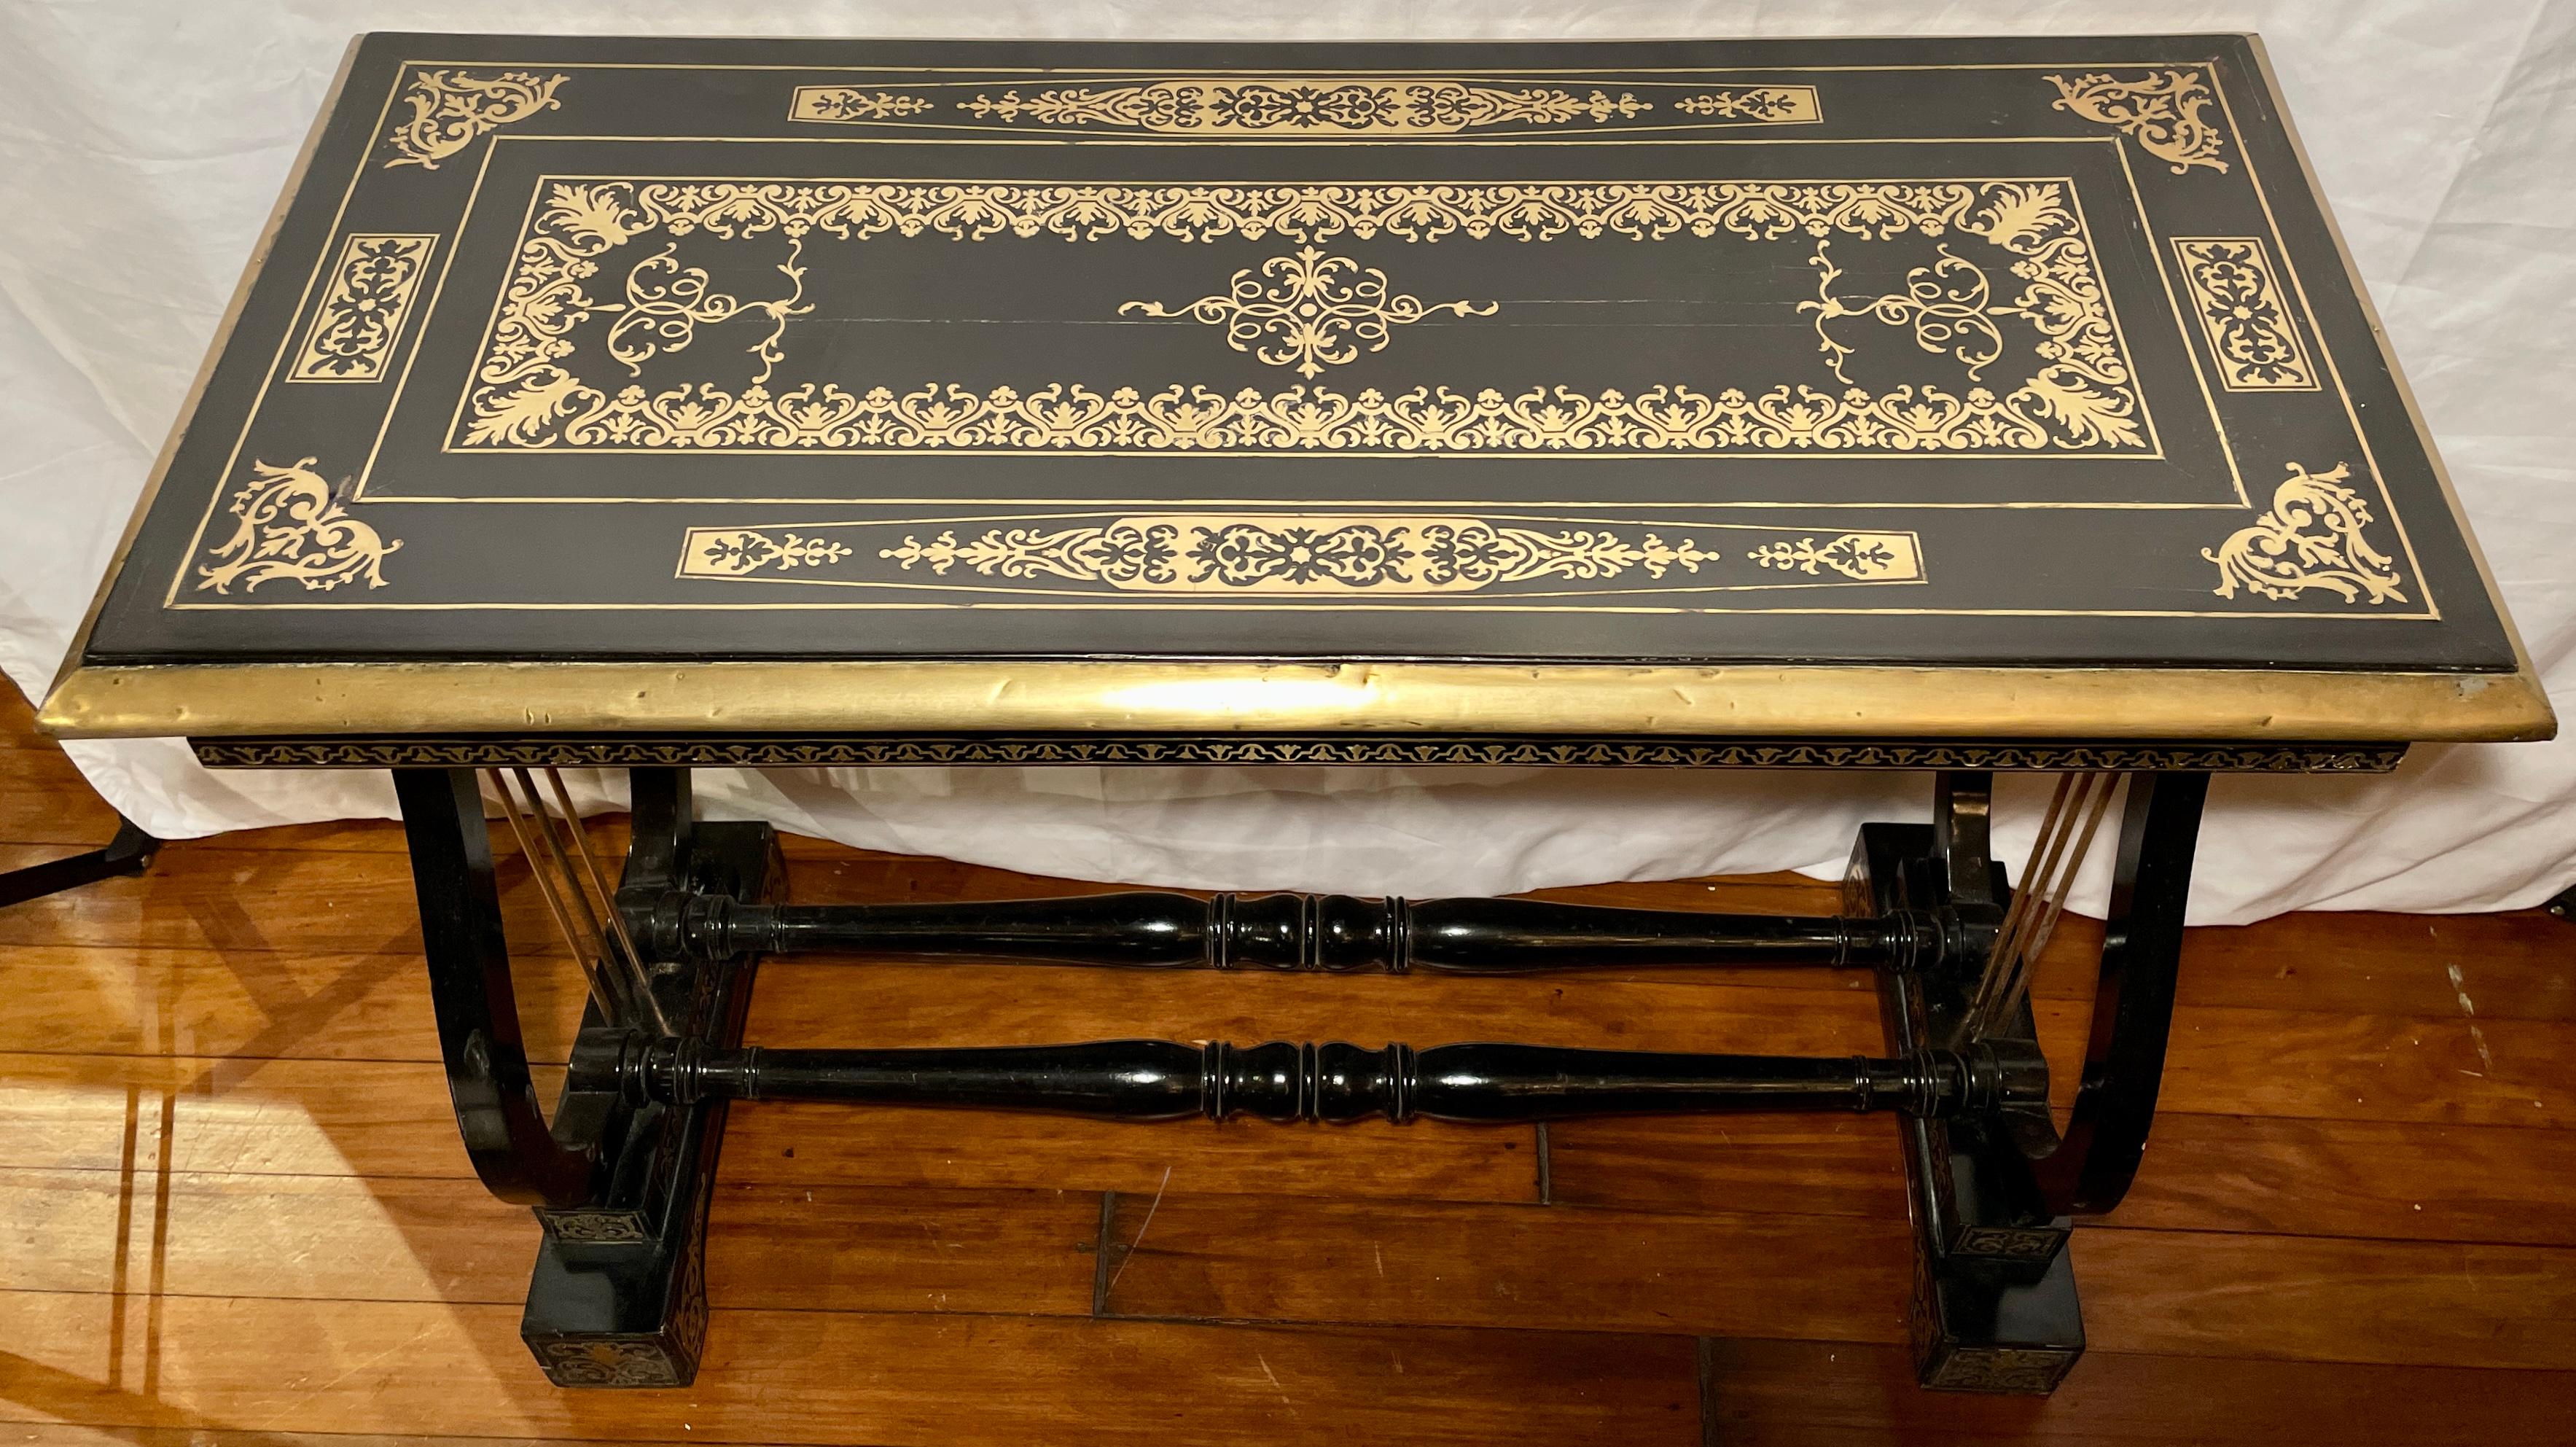 Antique English Regency Inlaid Ebonized Wood Table, Circa 1890 In Good Condition For Sale In New Orleans, LA